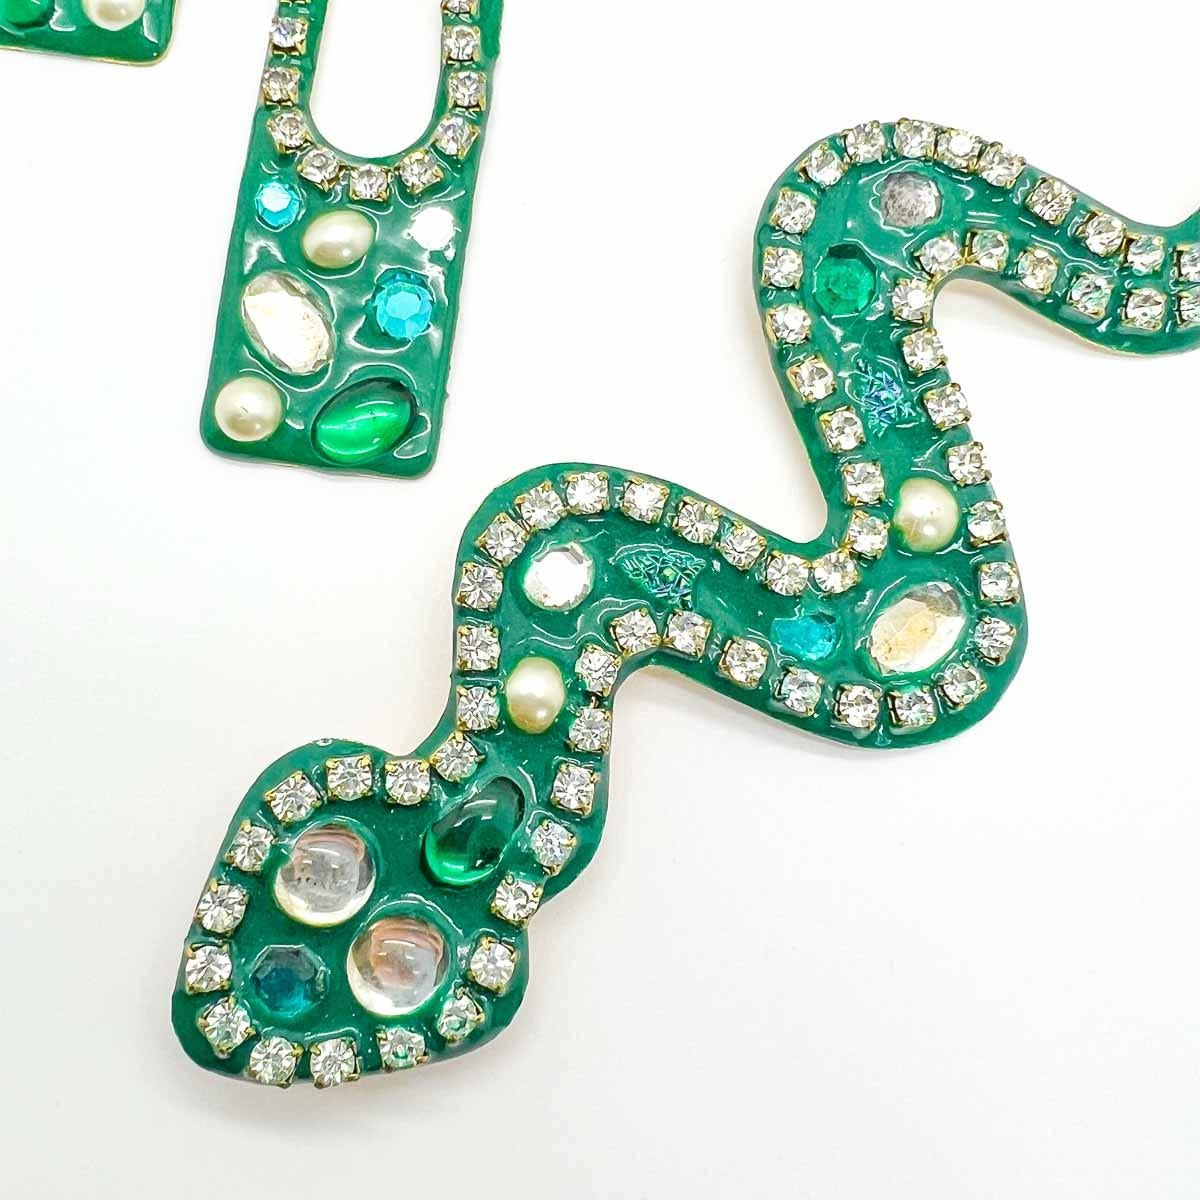 Vintage Fernellas Jools NYC Oversized Snake Brooch, Cuff & Earrings 1980s In Excellent Condition For Sale In Wilmslow, GB